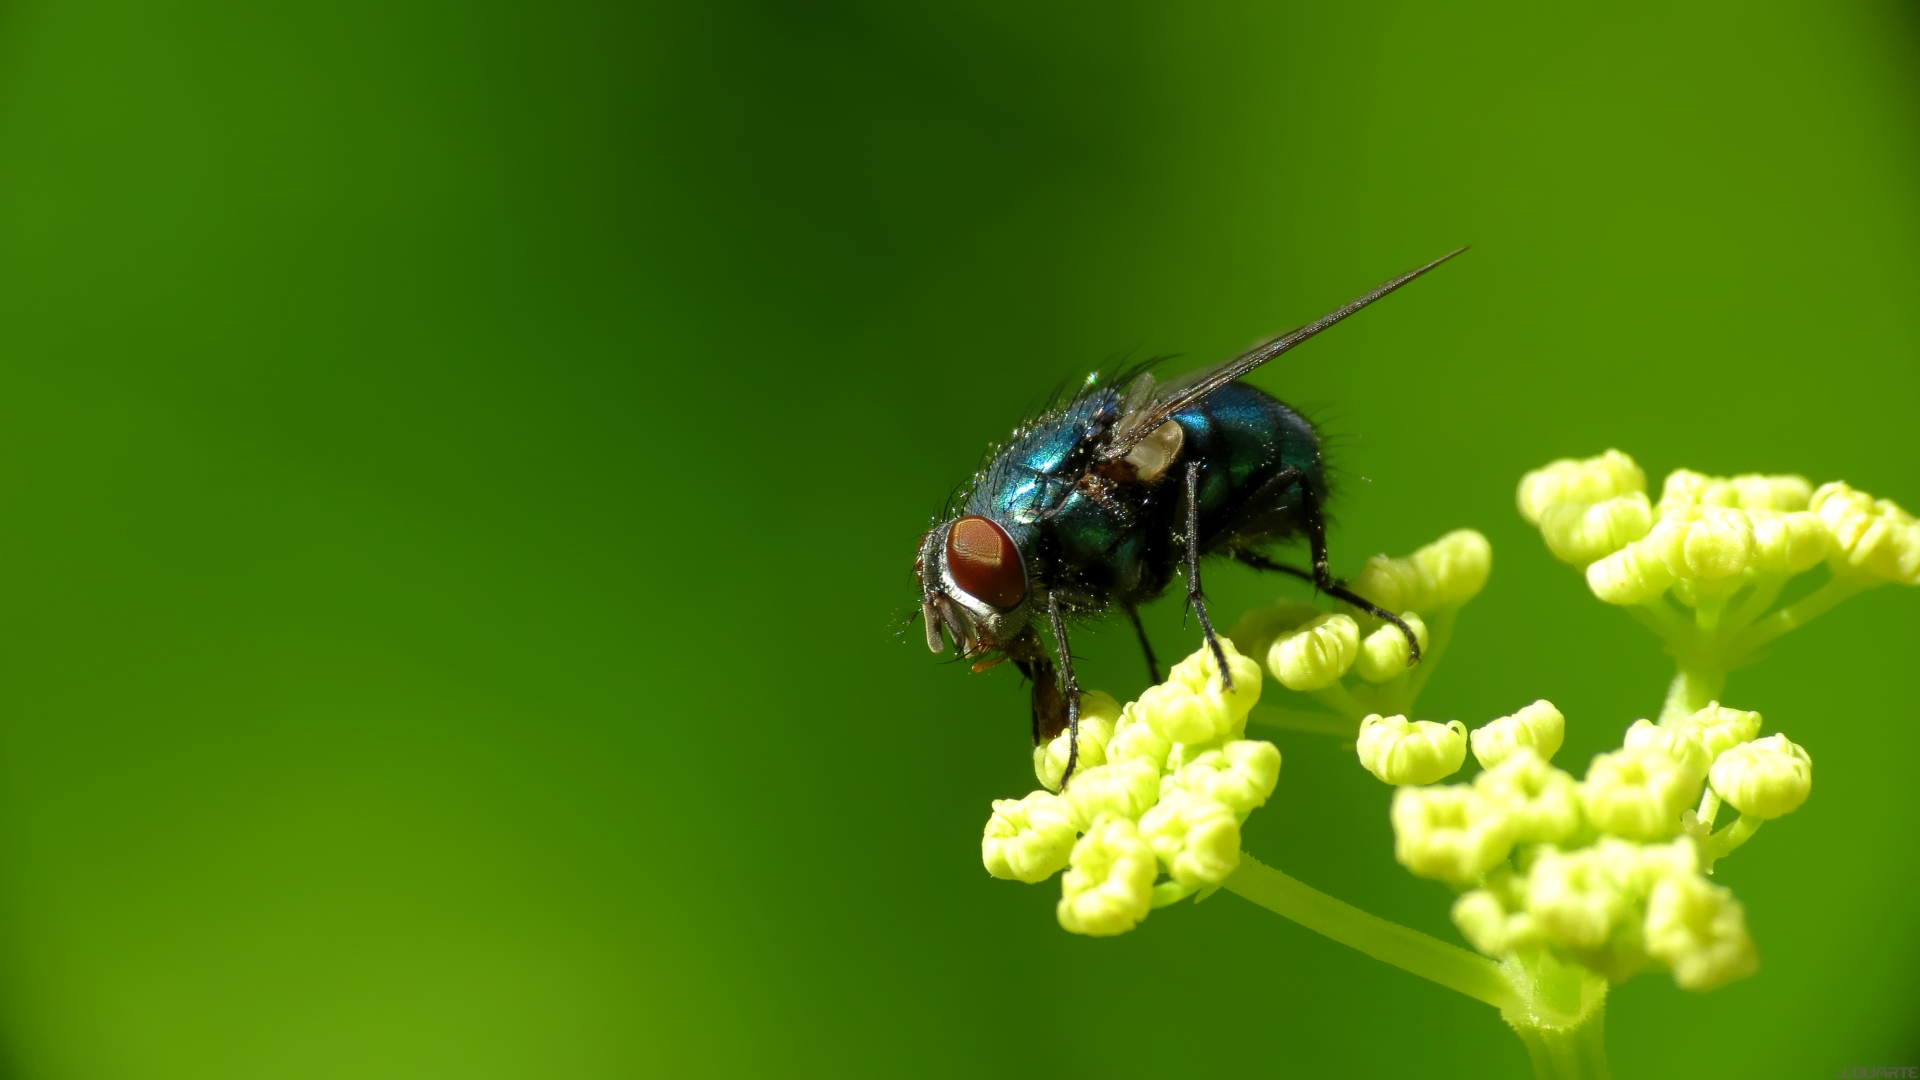 fly wallpaper,insect,tachinidae,pest,invertebrate,macro photography